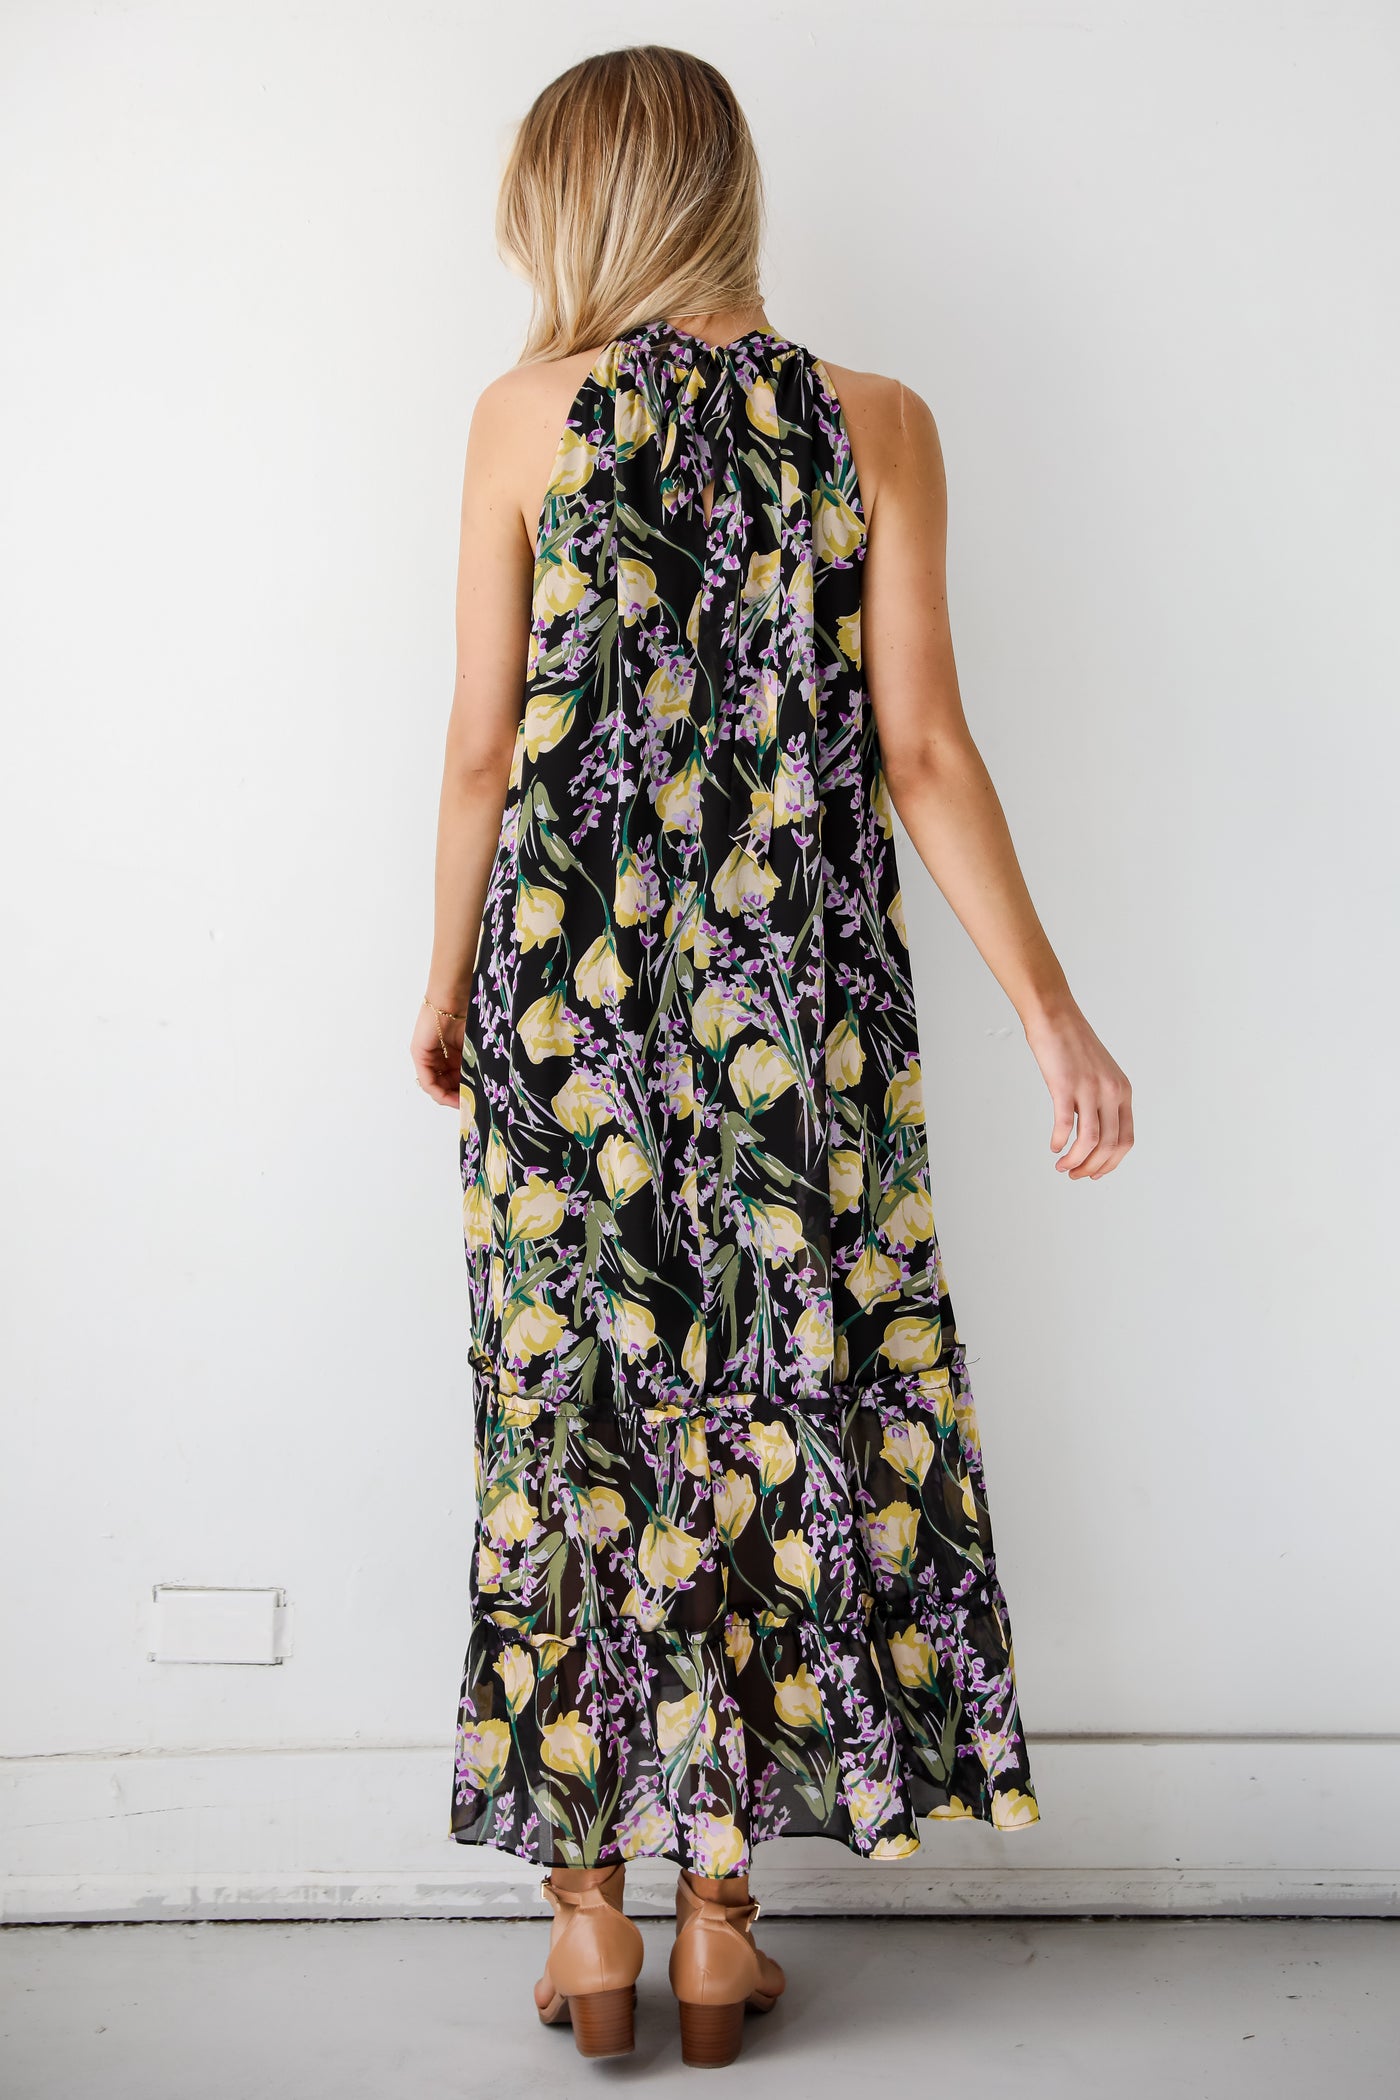 cute dressesSunny Day Sweetie Black Floral Maxi Dress